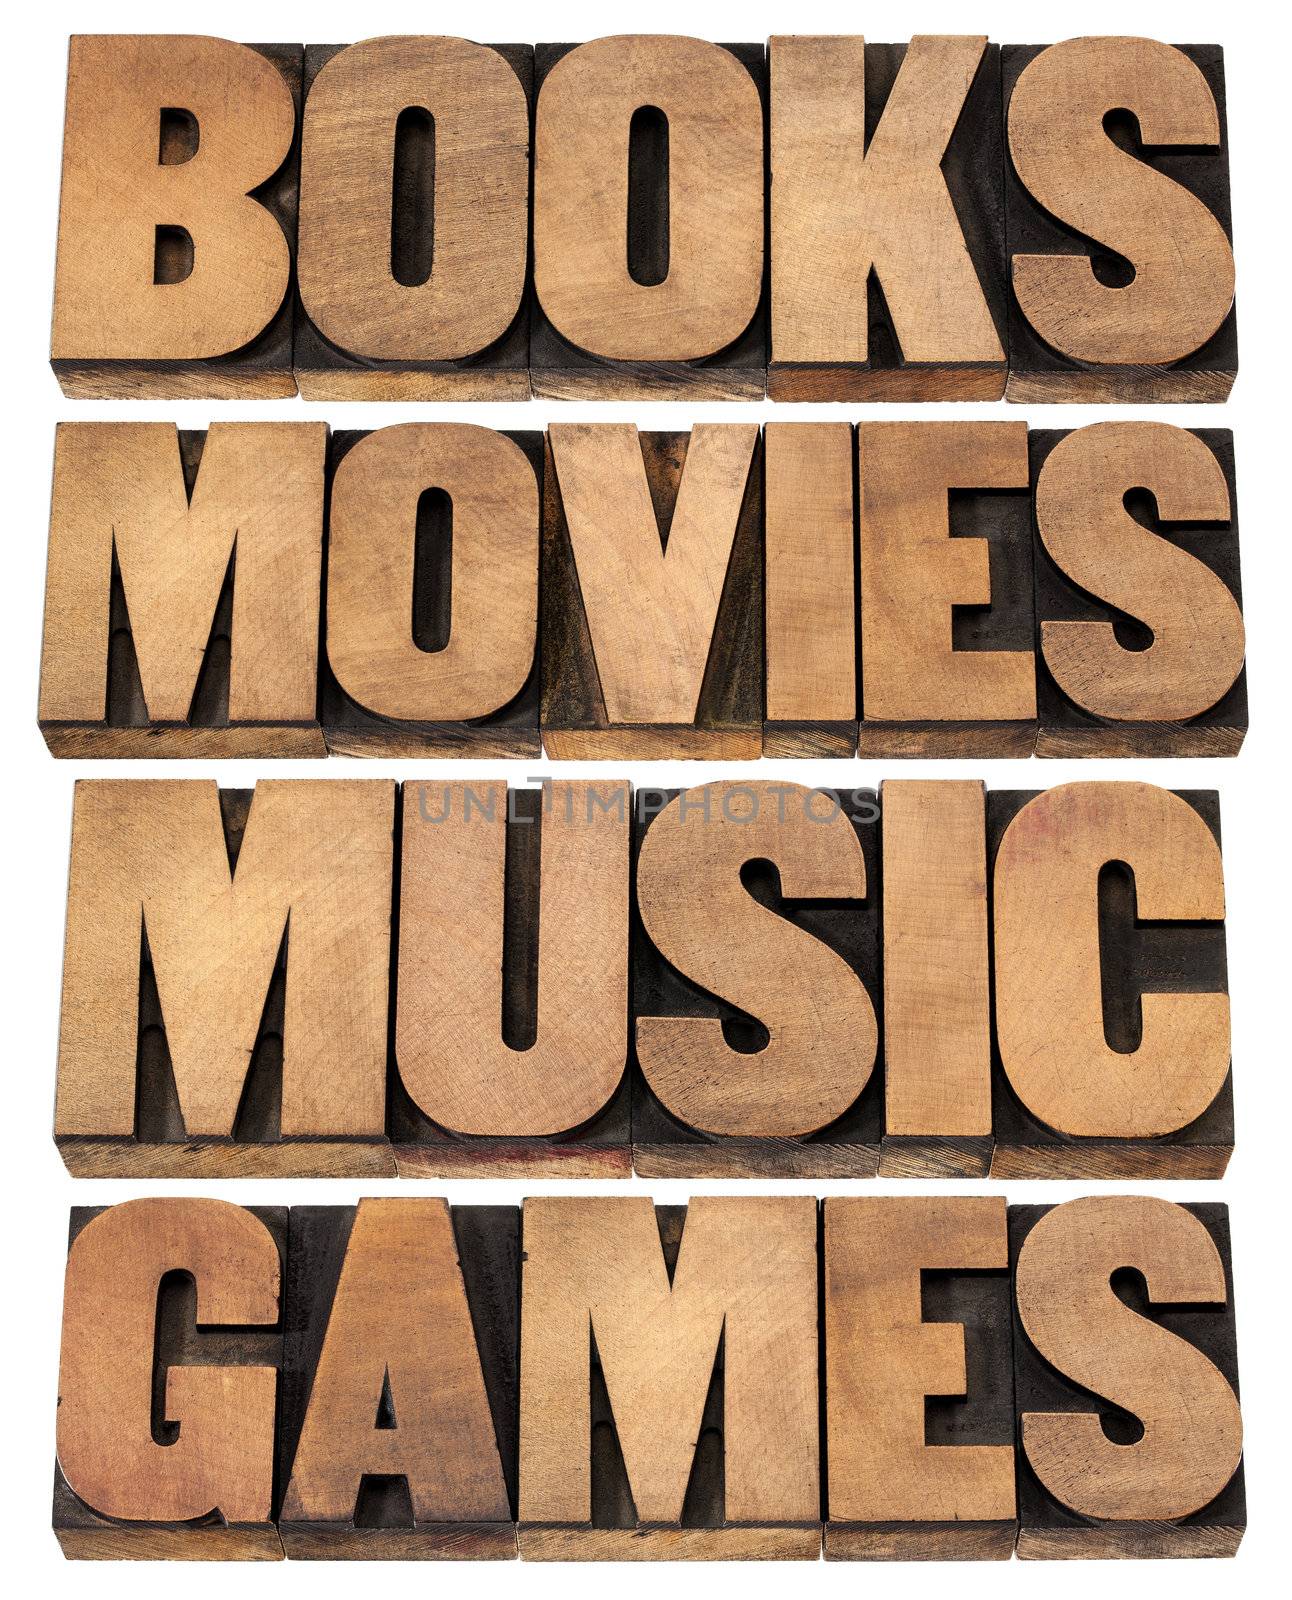 books, movies, music and games by PixelsAway